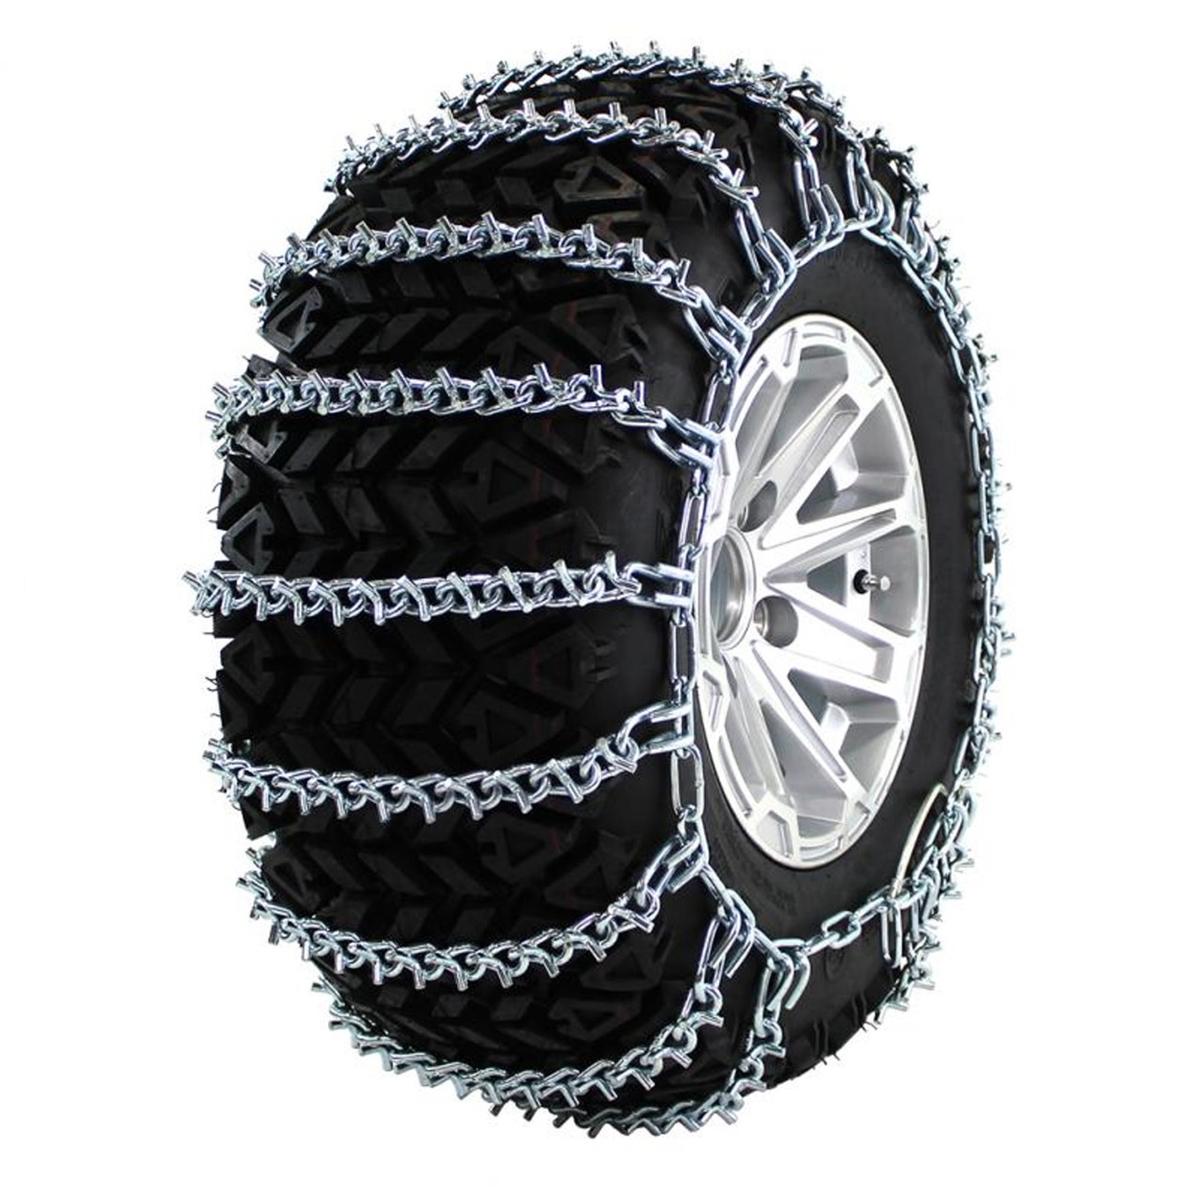 V-Bar 2 Link 24-11.00-10 ATV - UTV Tire Chains - Midwest Traction 2 Link Vs 4 Link Tire Chains